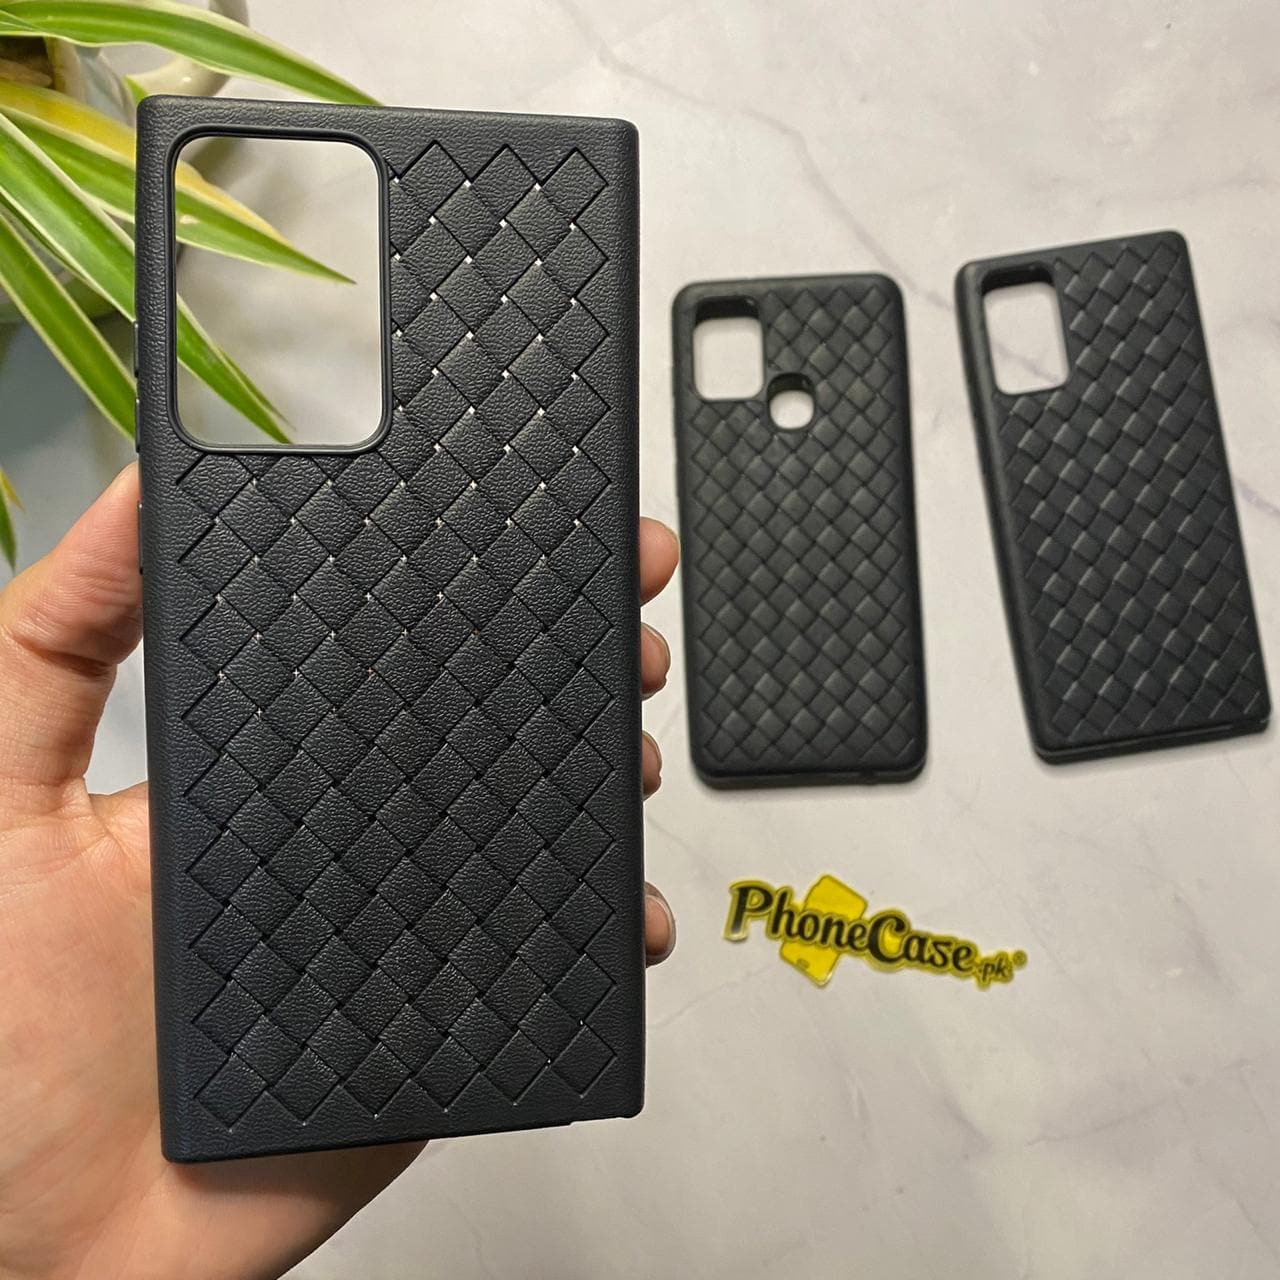 Leather Feel Mesh Shock Proof Case For All Samsung Models